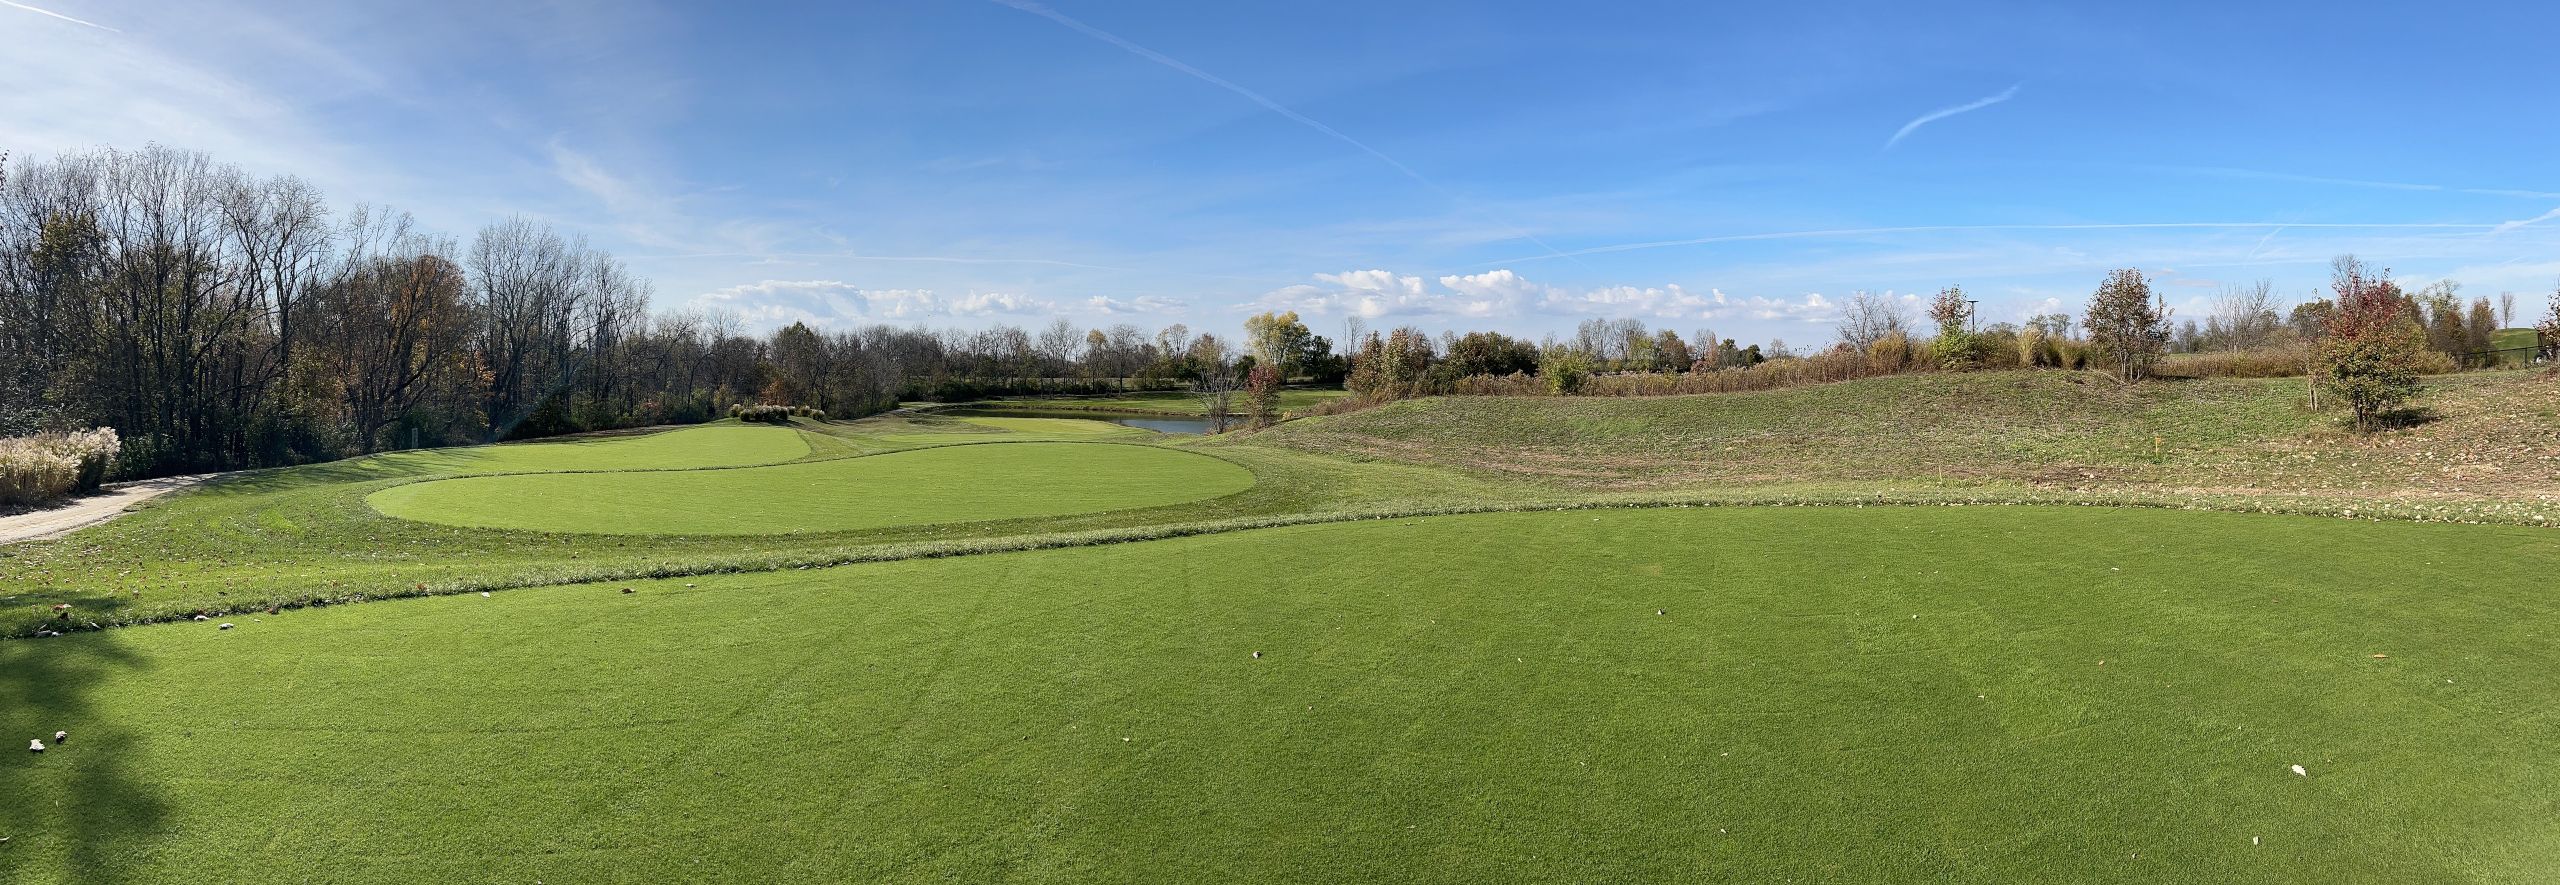 Lassing-Pointe-Golf-Course Golf-Course-Gallery-Widgetkit February-2024-Lassing-Pointe-Golf-Course-Golf-Course-Gallery-Widgetkit February-2024-LPGC-2024-Image-Gallery-Landscape-Image-